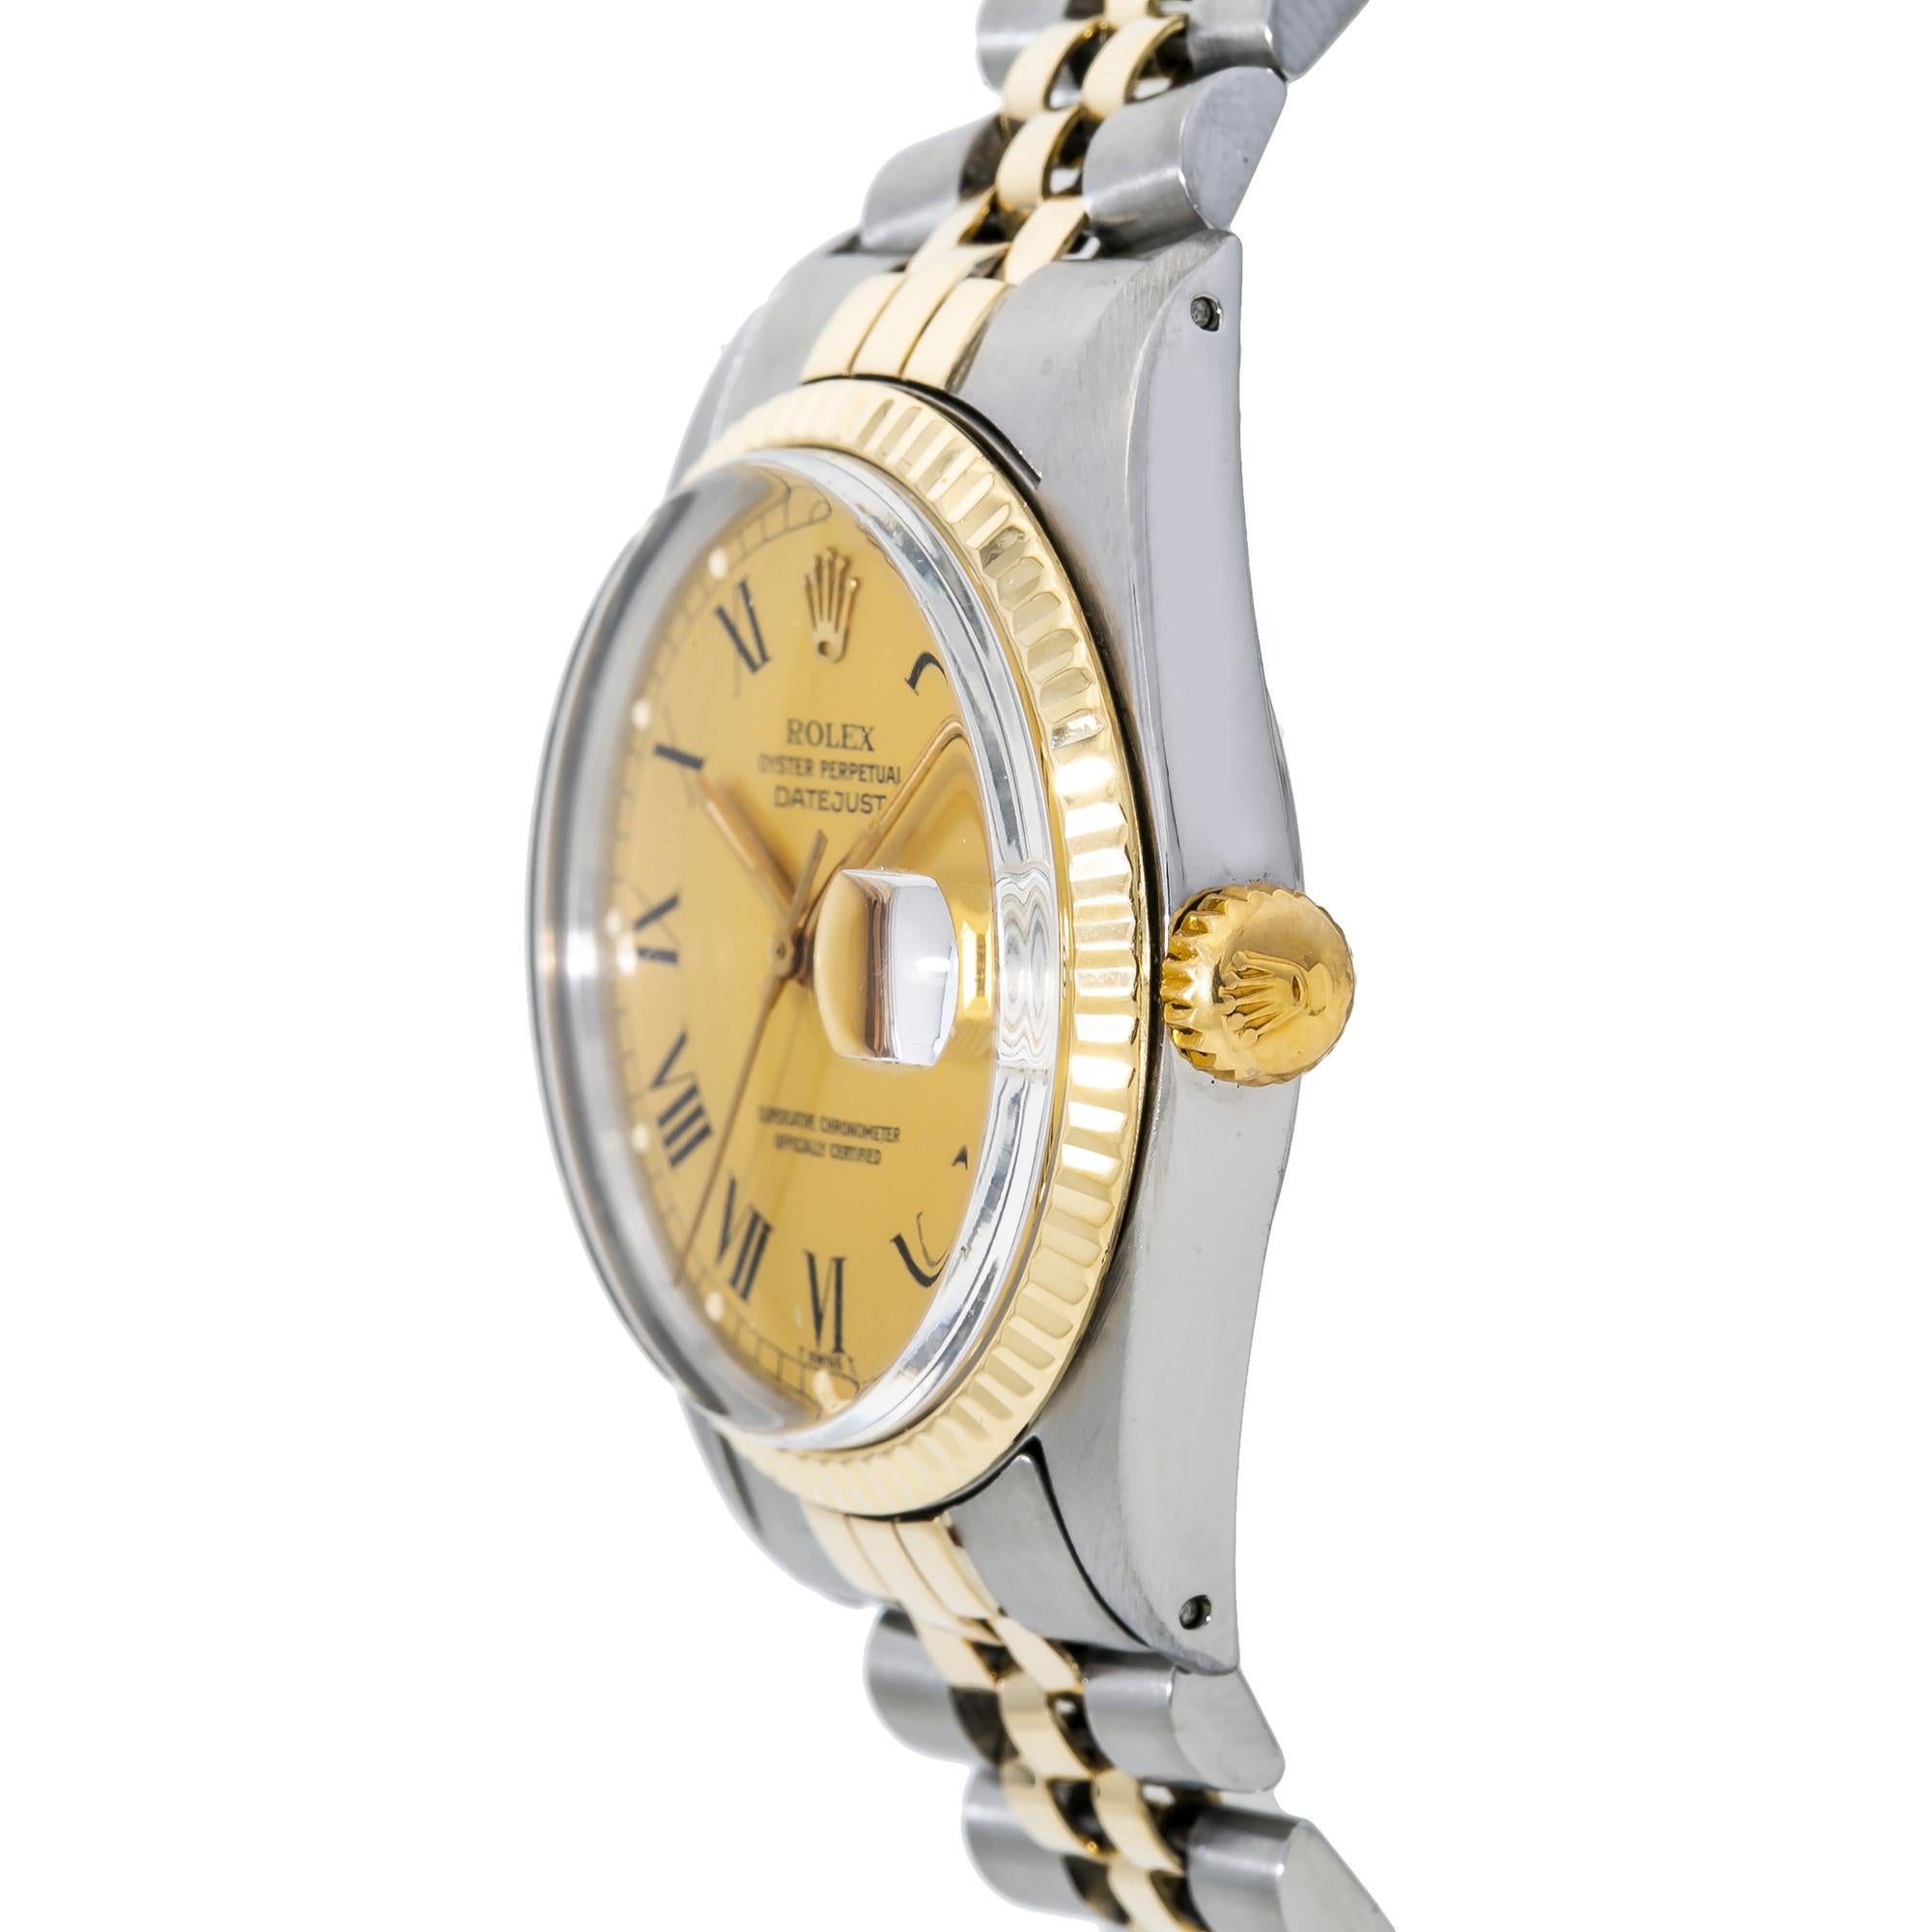 Contemporary Rolex Datejust 16013, Champagne Dial, Certified and Warranty For Sale